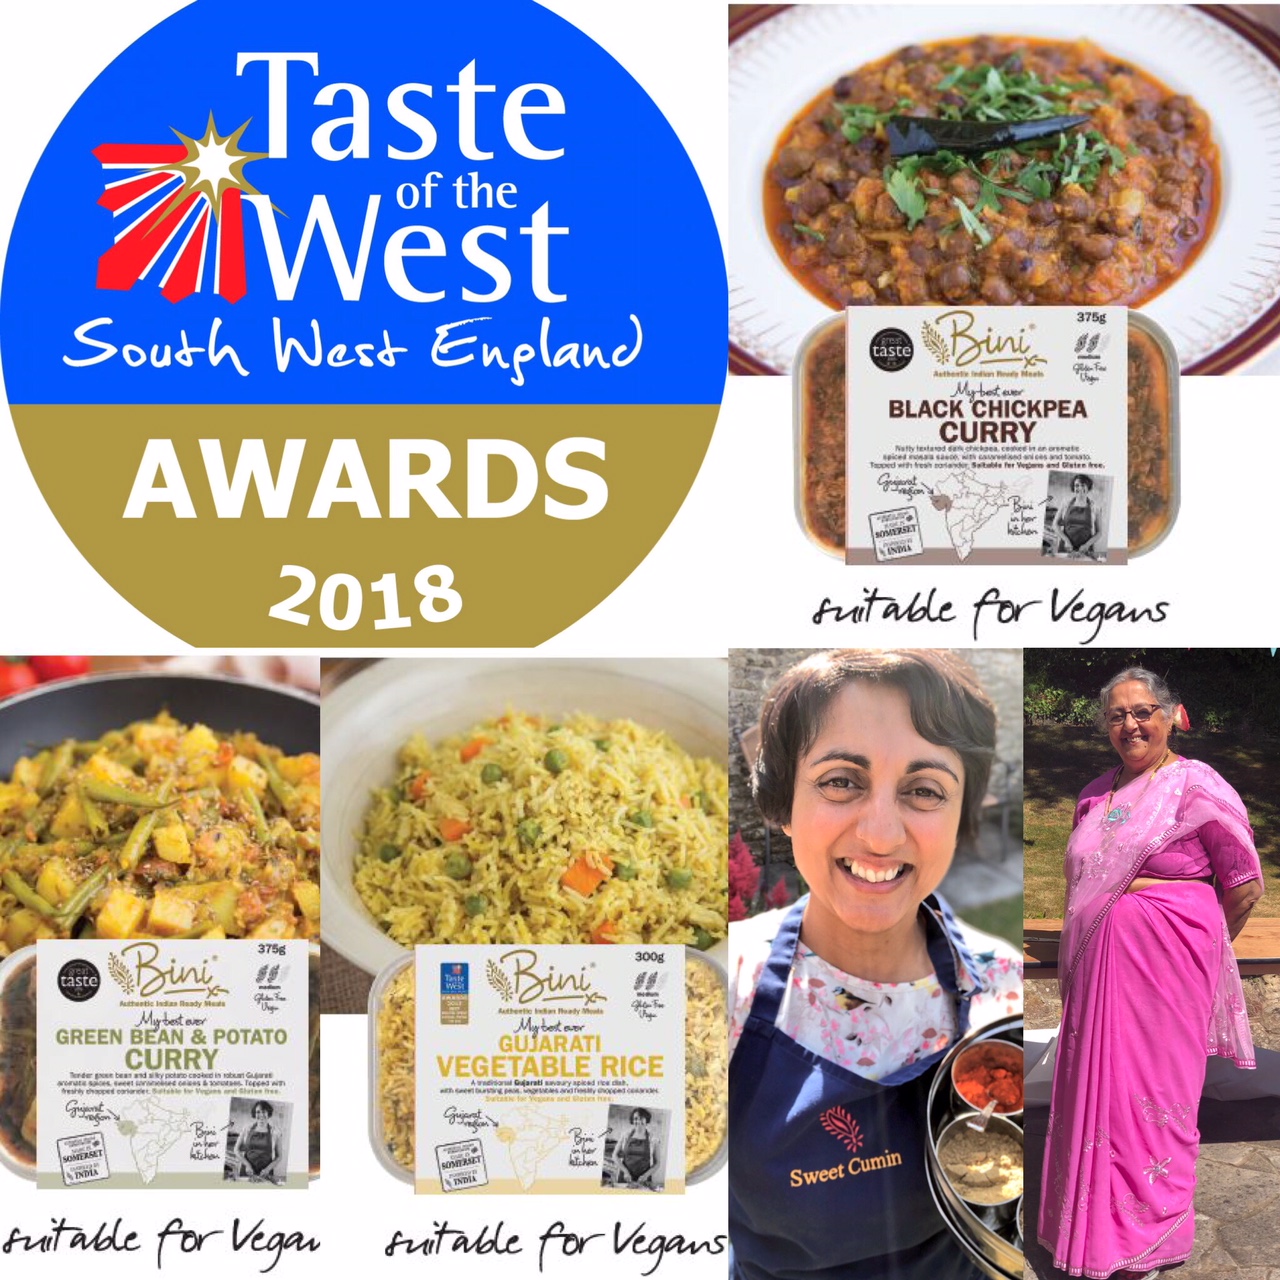 3 GOLD AWARDS for Bini Curries VEGAN readymeals in the Taste of the West Awards 2018